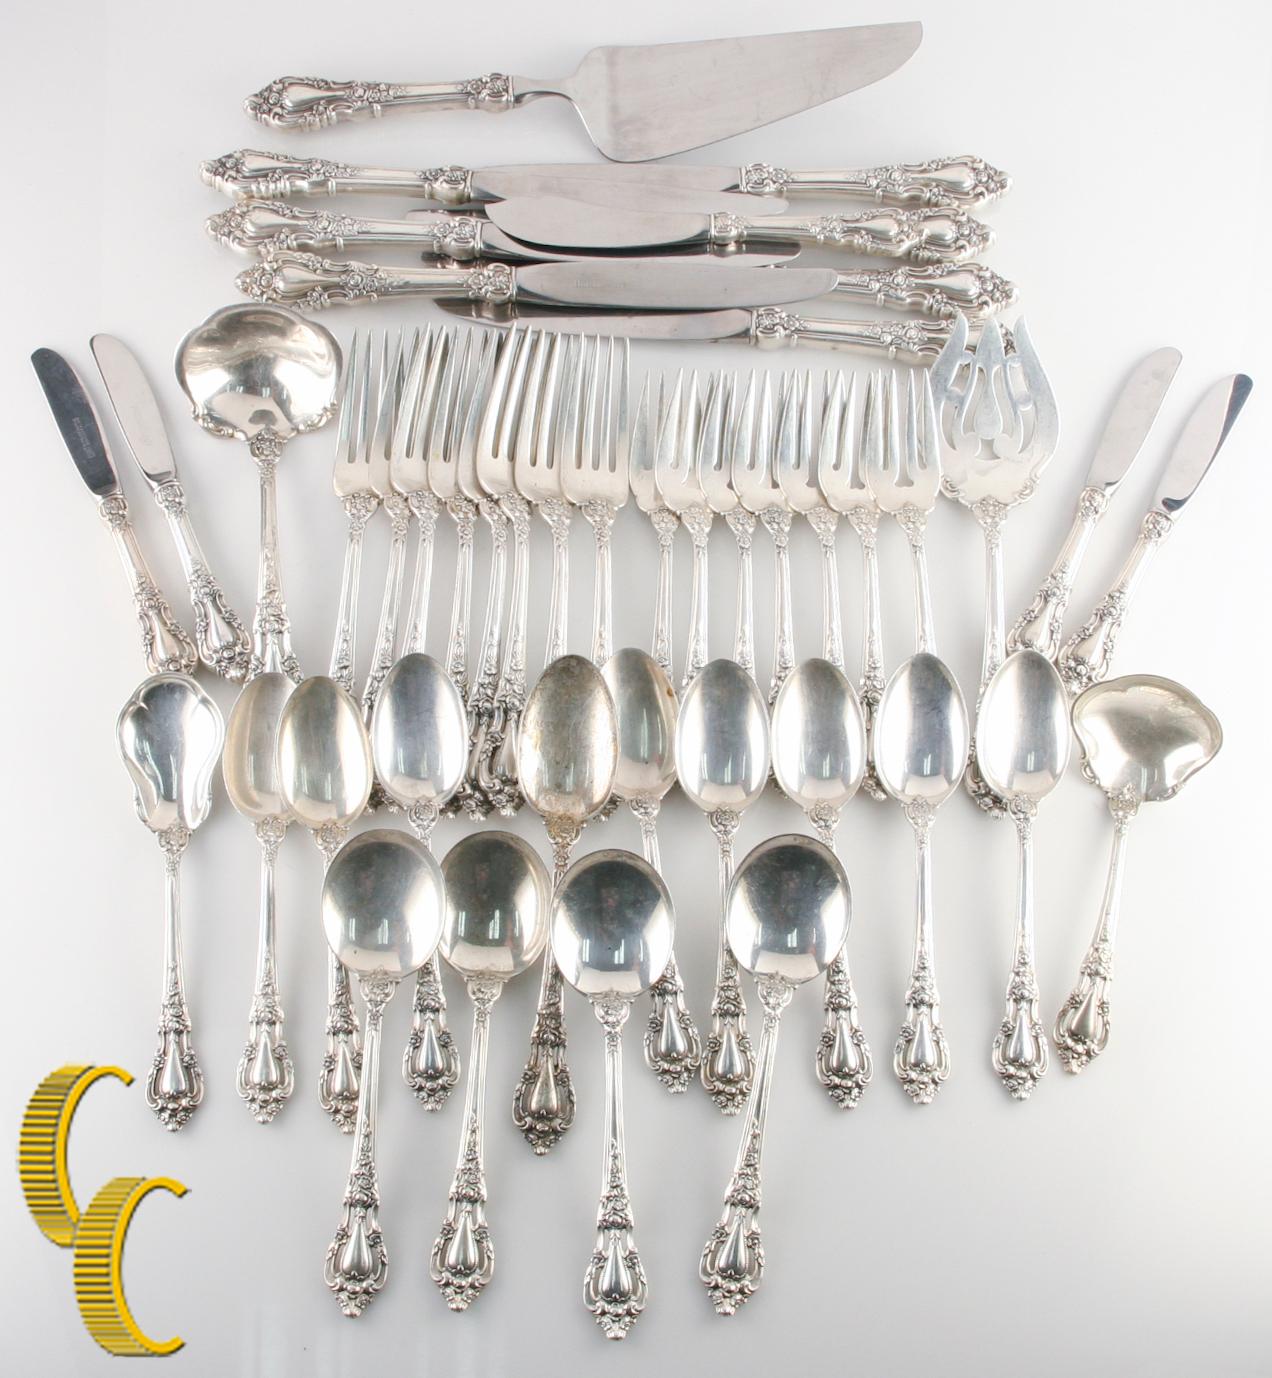 Amazing Sterling Silver Flatware Set by Lunt
Eloquence Pattern (Produced Between 1953 & 2012. Now Retired)
Set Includes:
7 Modern Hollow Knives (9